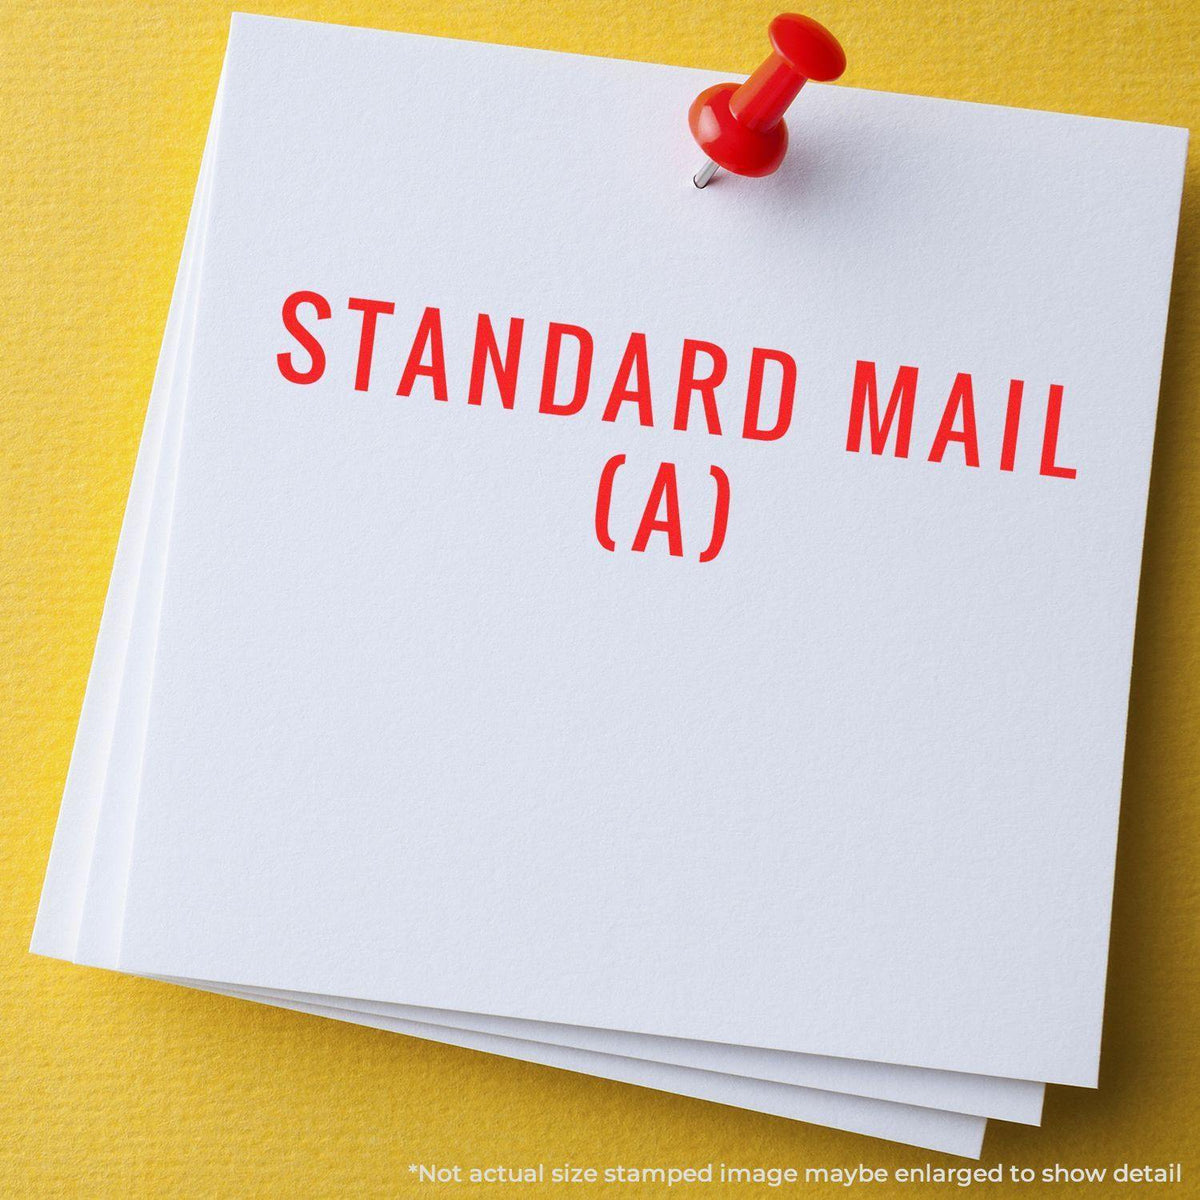 Standard Mail A Rubber Stamp In Use Photo